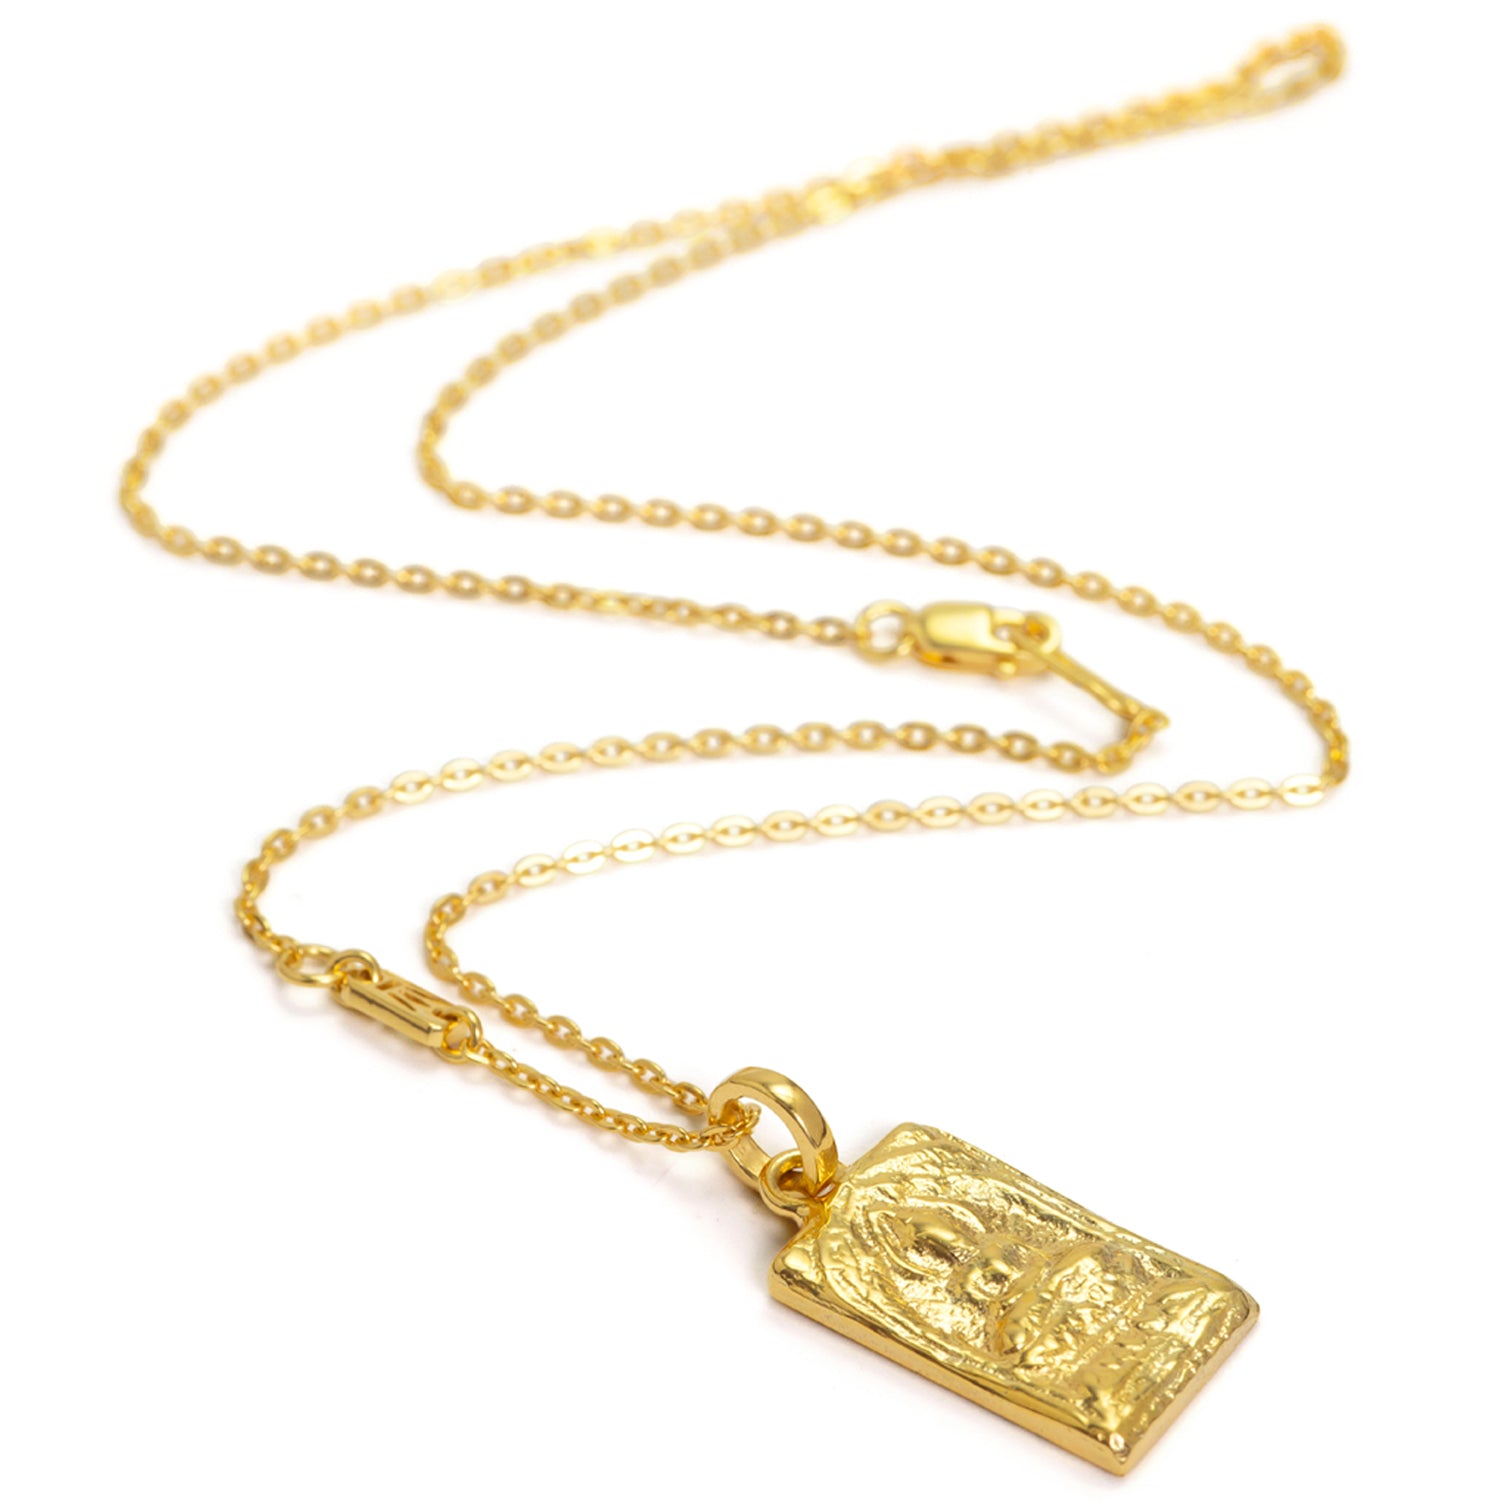  Magical Buddha pendant with chain made of high-quality gold-plated sterling silver by ETERNAL BLISS - Spiritual Symbol Jewellery